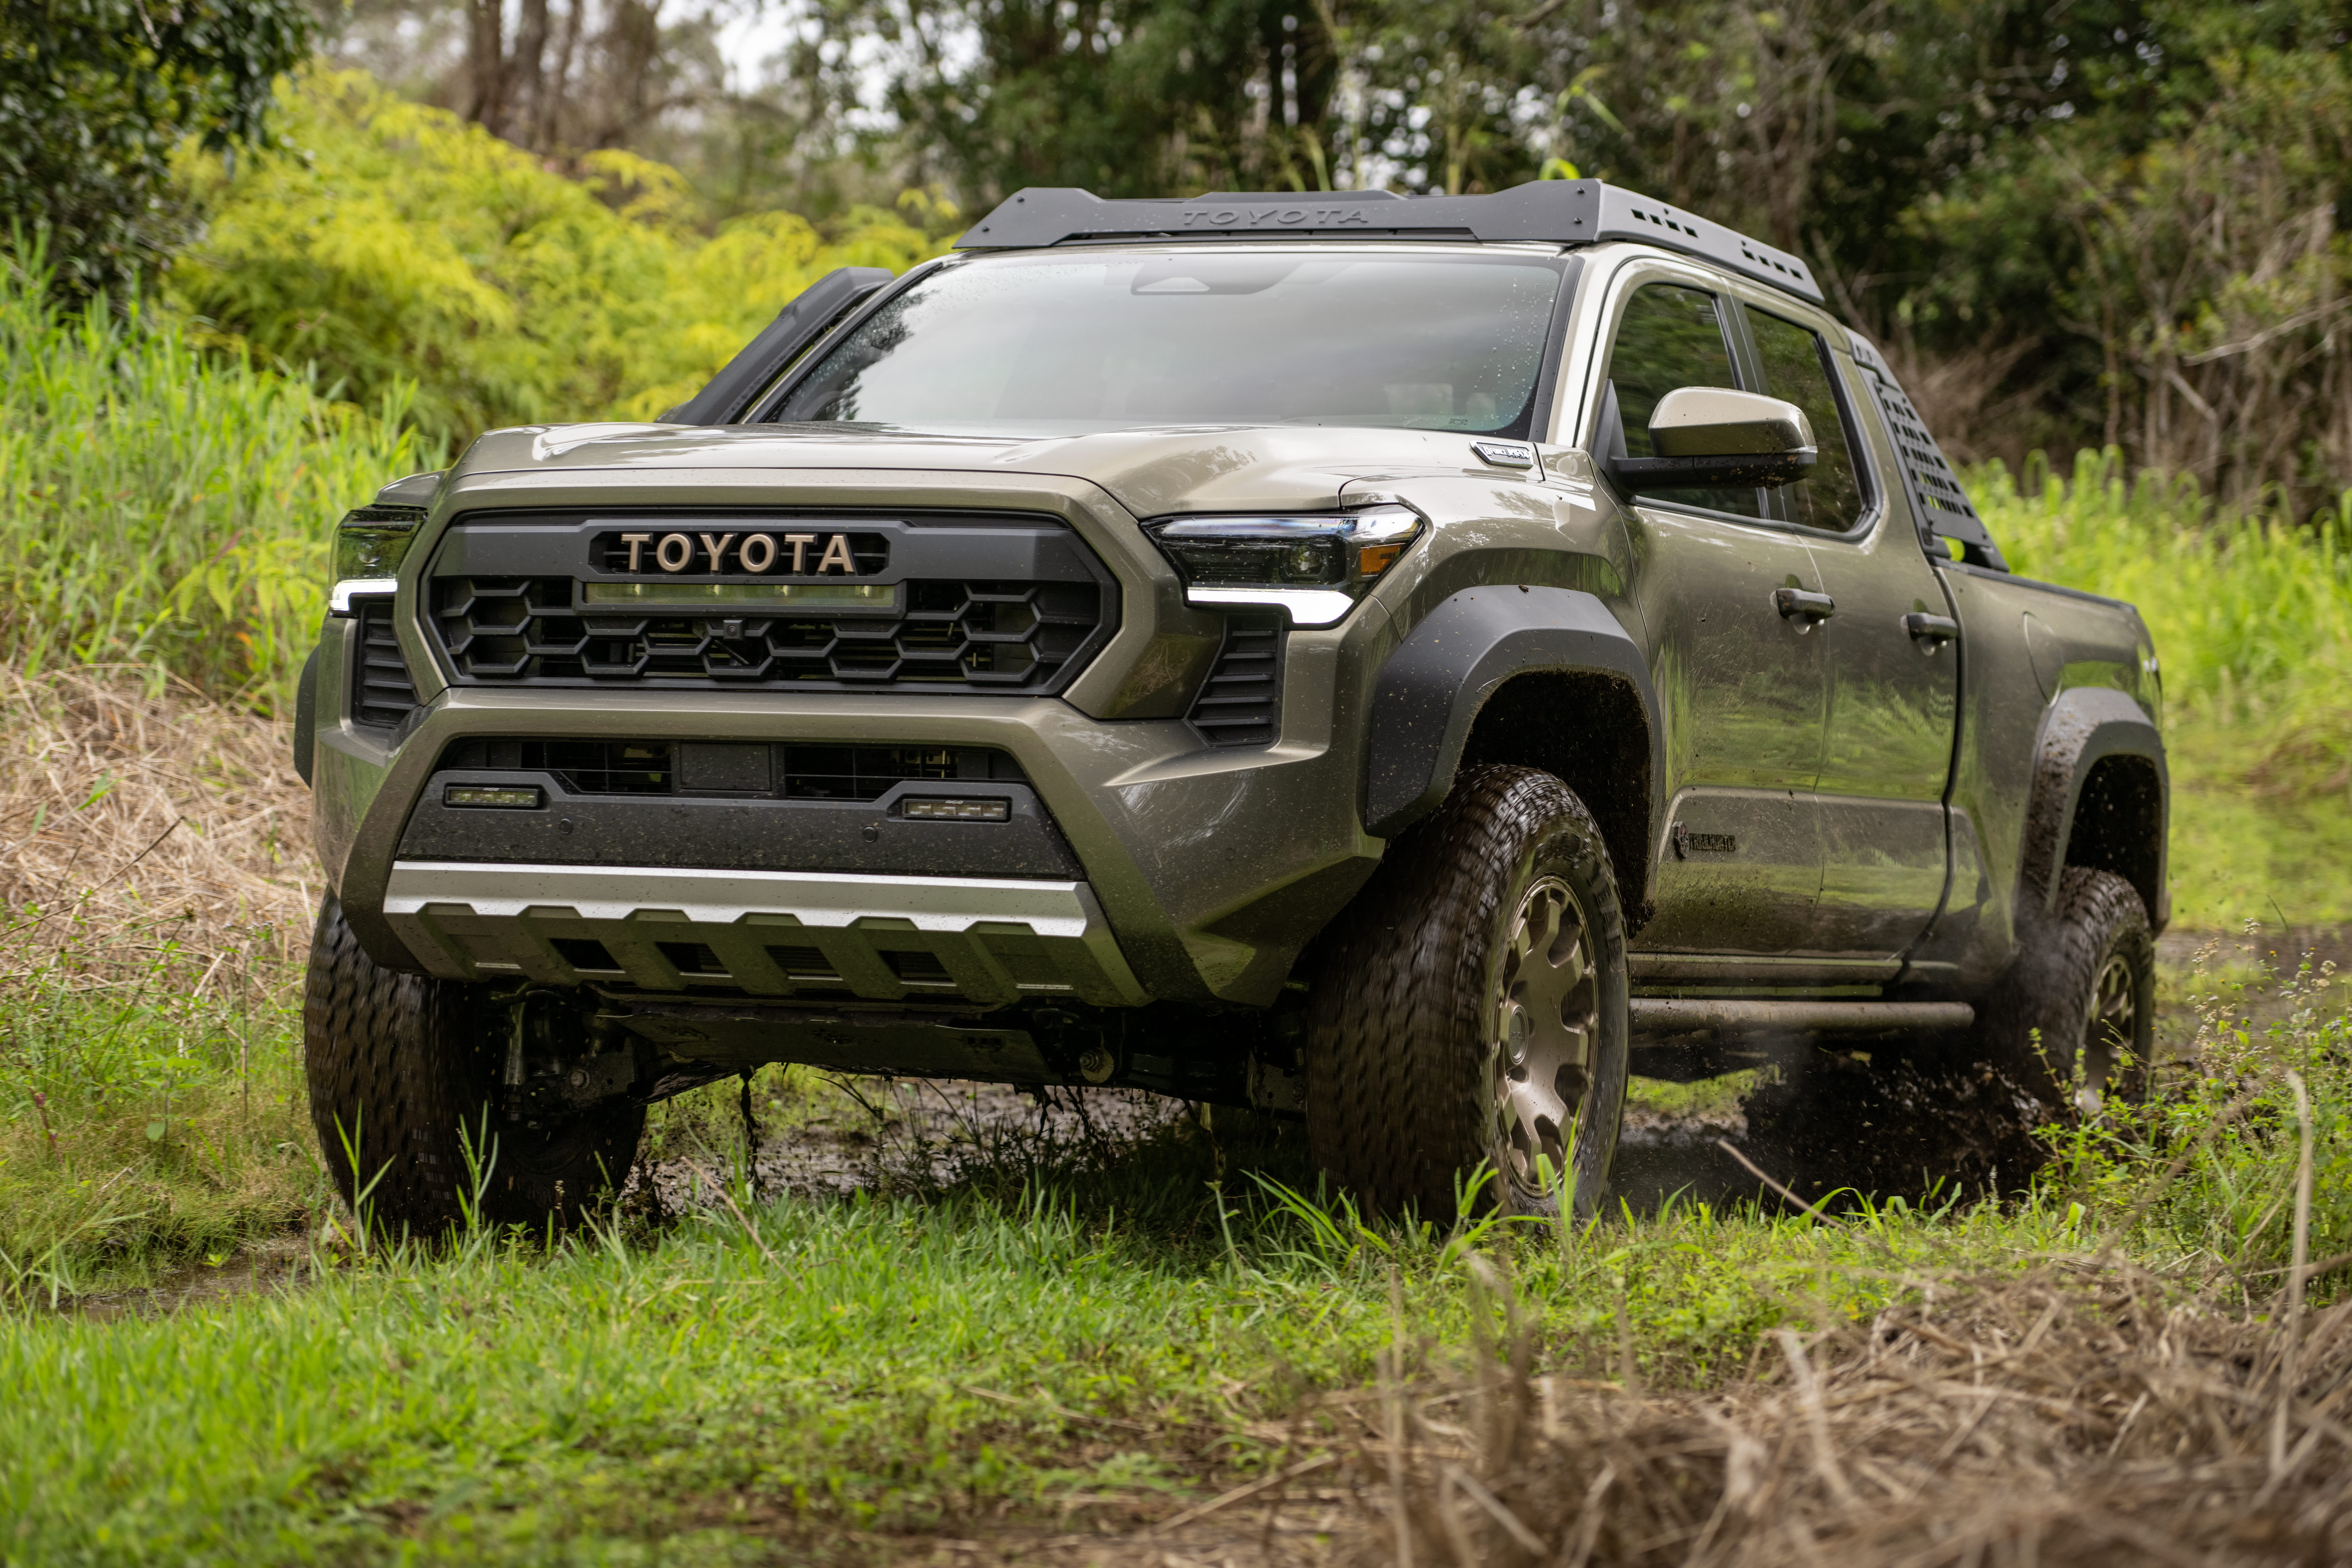 Toyota redesigns Tacoma pickup amid increased midsize competition